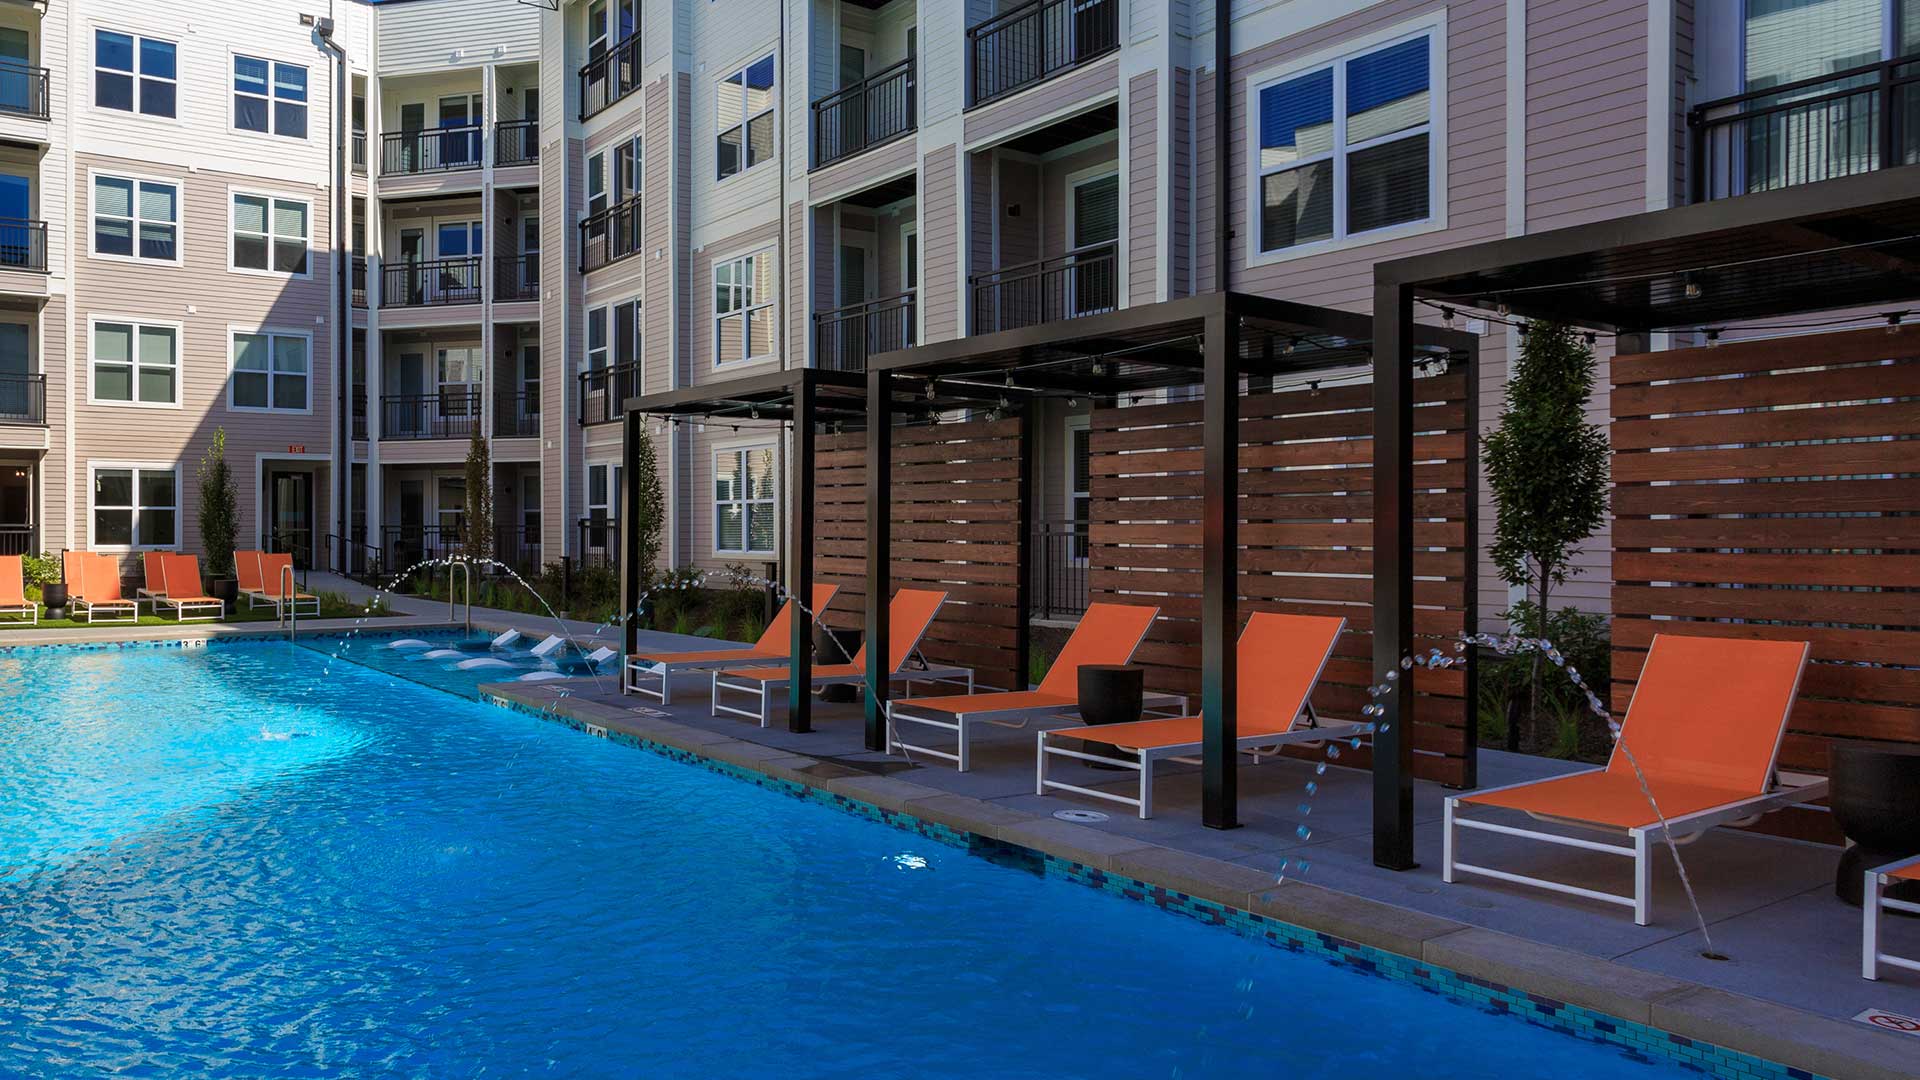 Looking across the pool at the poolside cabanas with orange lounge chairs beneath. The apartment building is in the background.